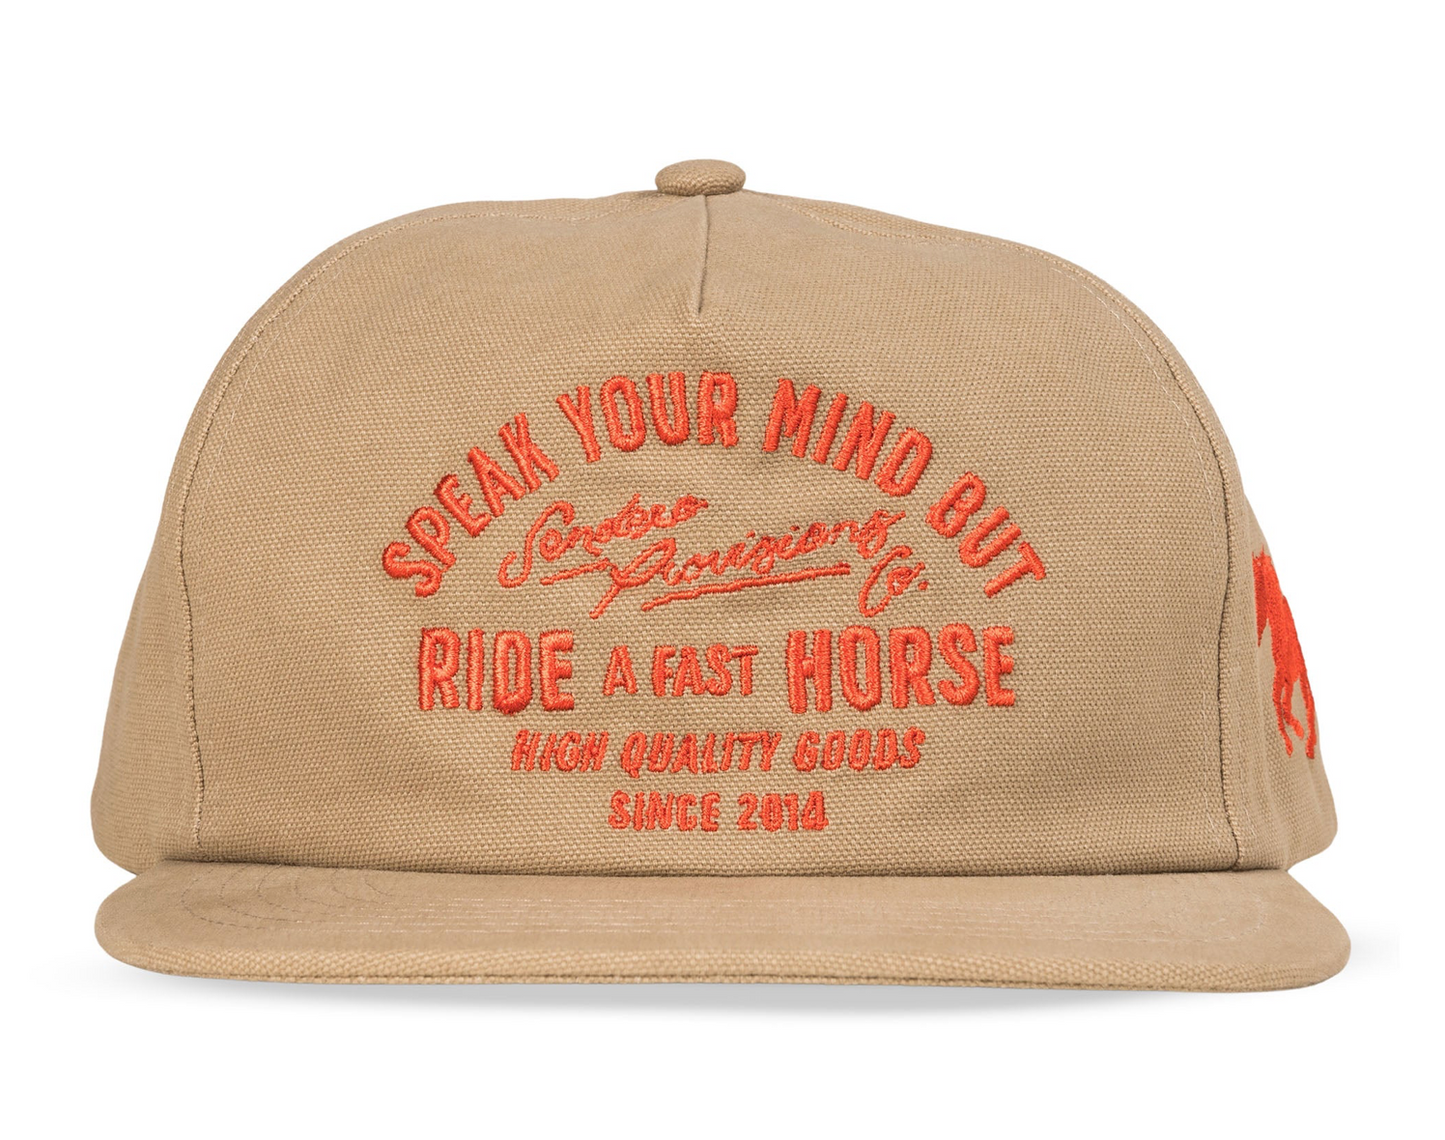 Fast Horse Hat